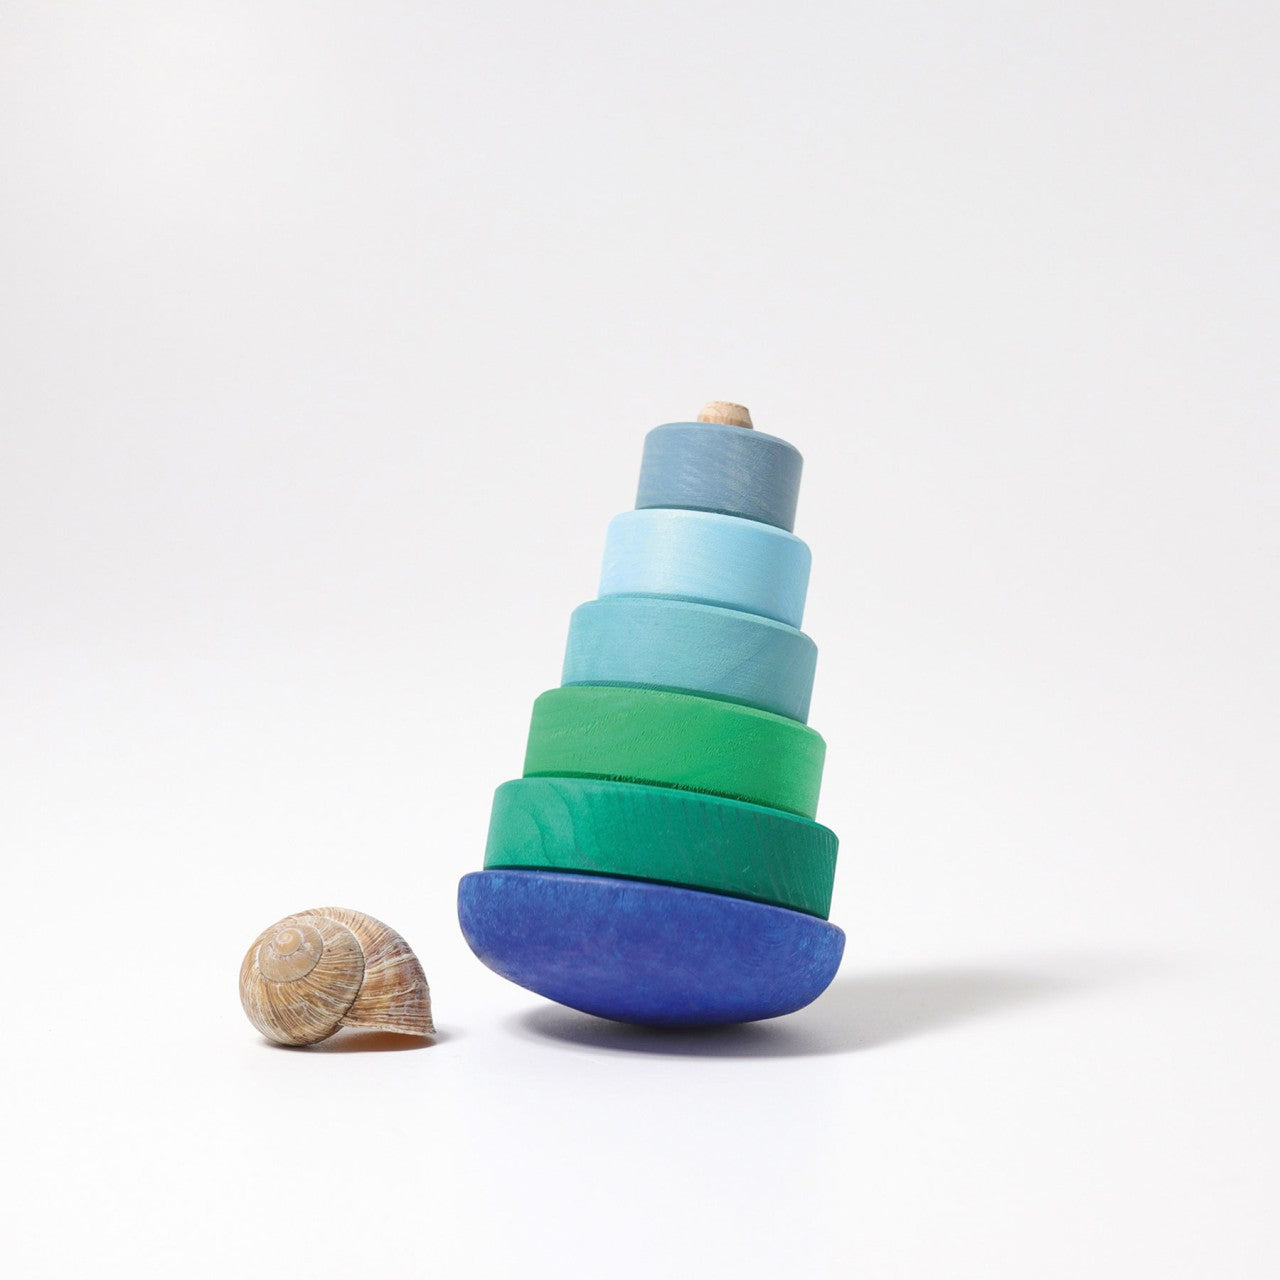 GRIMM'S Wobbly Stacking Tower Blue